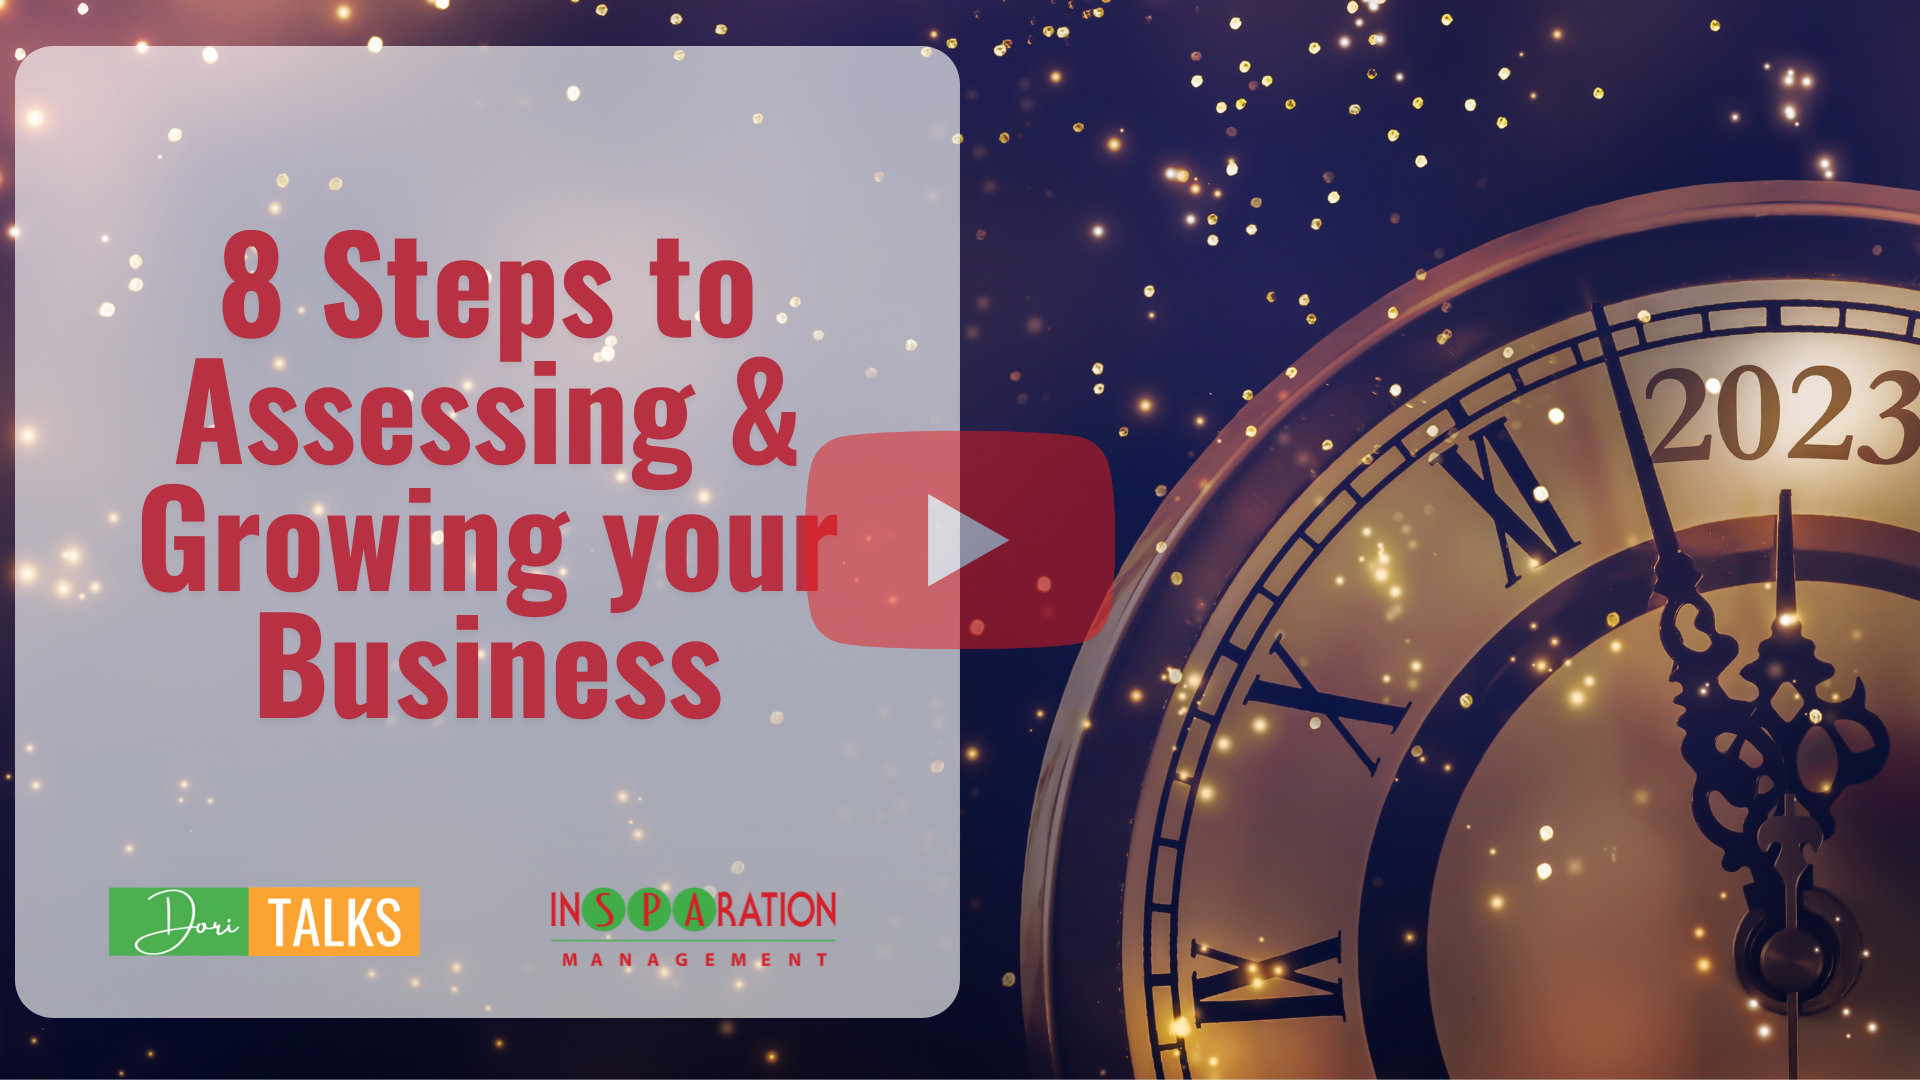 your-8-steps-to-assessing-growing-your-business.jpg